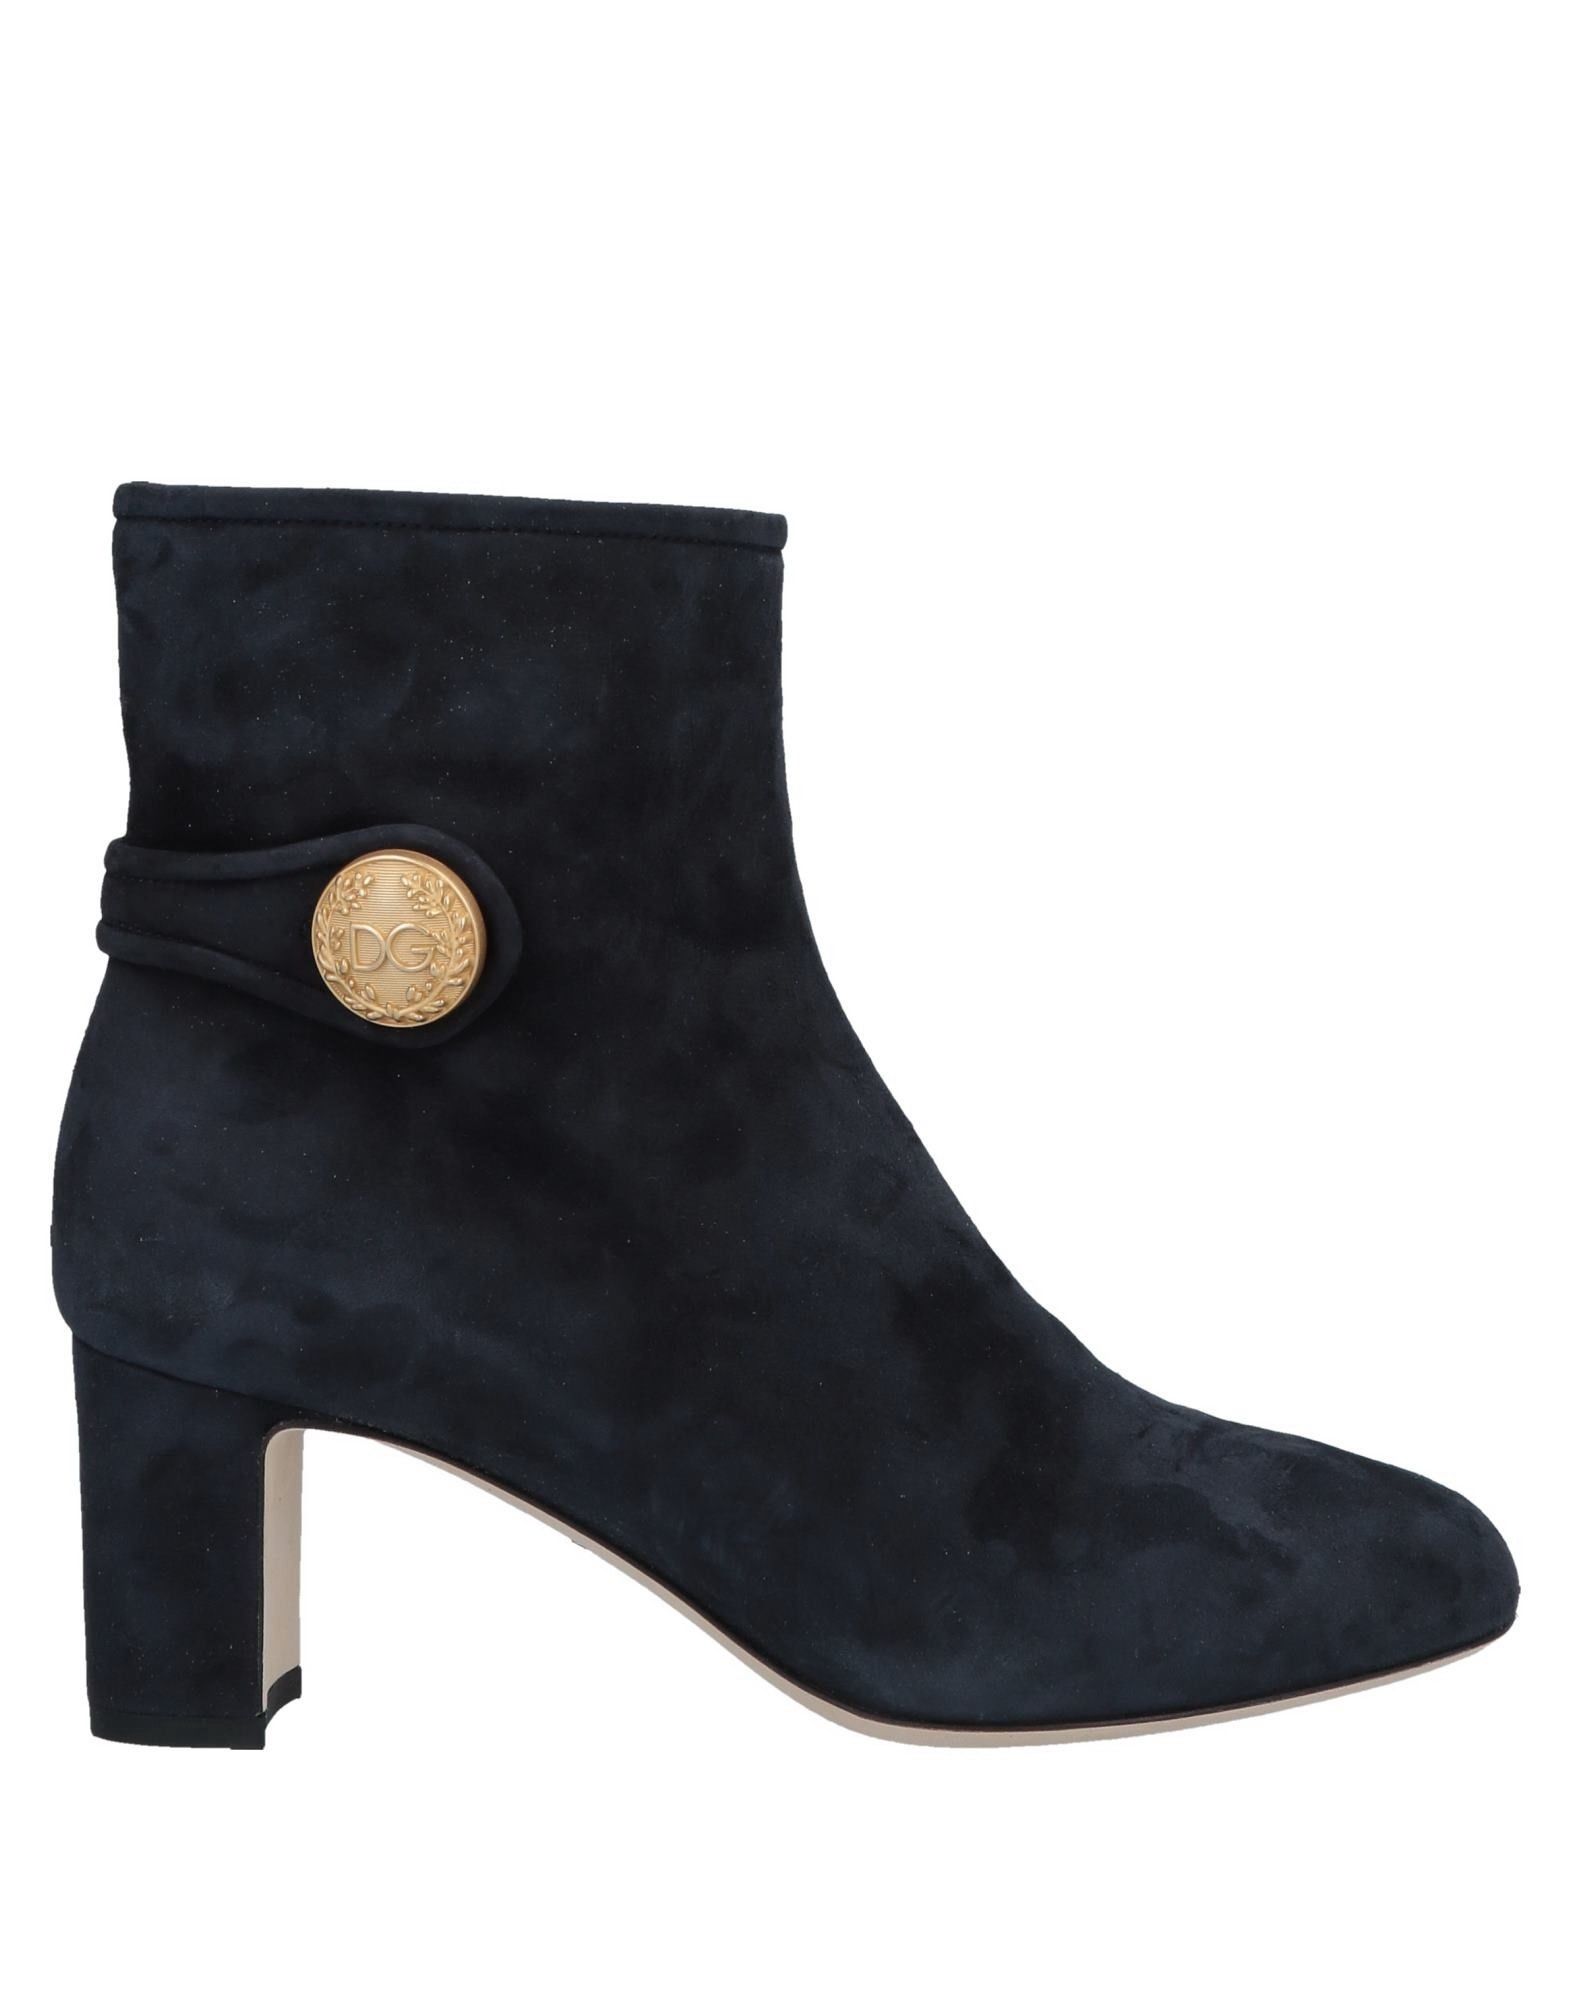 DOLCE & GABBANA Ankle boot,11509590WF 7